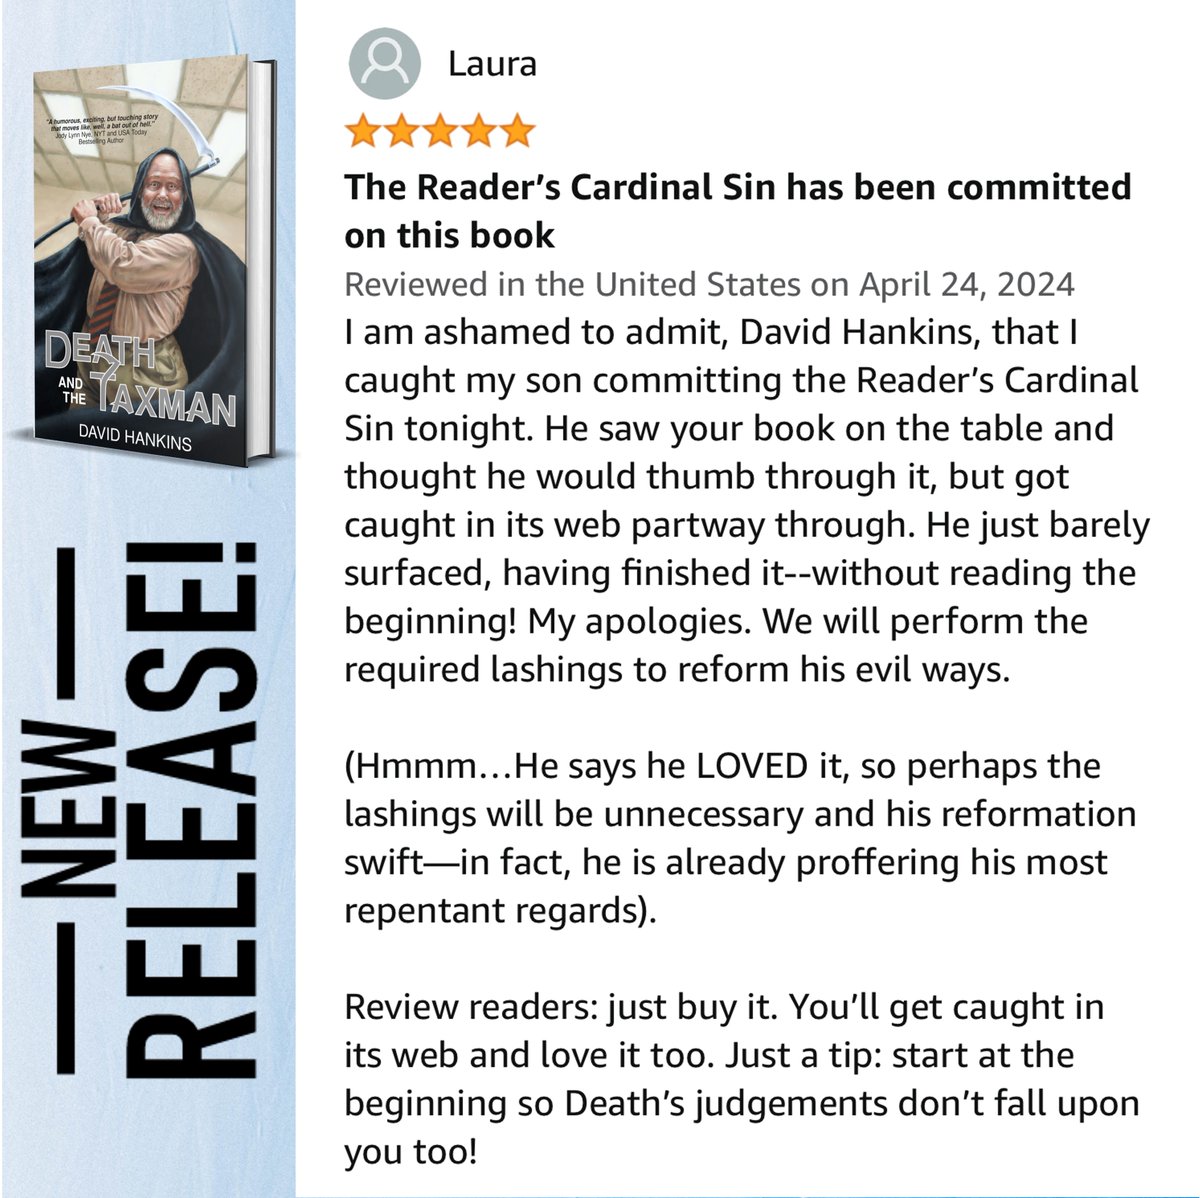 Bwahahaha!! Absolutely loved this review that popped up today for Death and the Taxman.

Get your copy here:
books2read.com/deathandthetax…

#deathandthetaxman #bookreview #humor #newrelease #newreleasebooks #newbookalert #dyinglaughing #readingtime #readingisfun #readinglist #hilarious